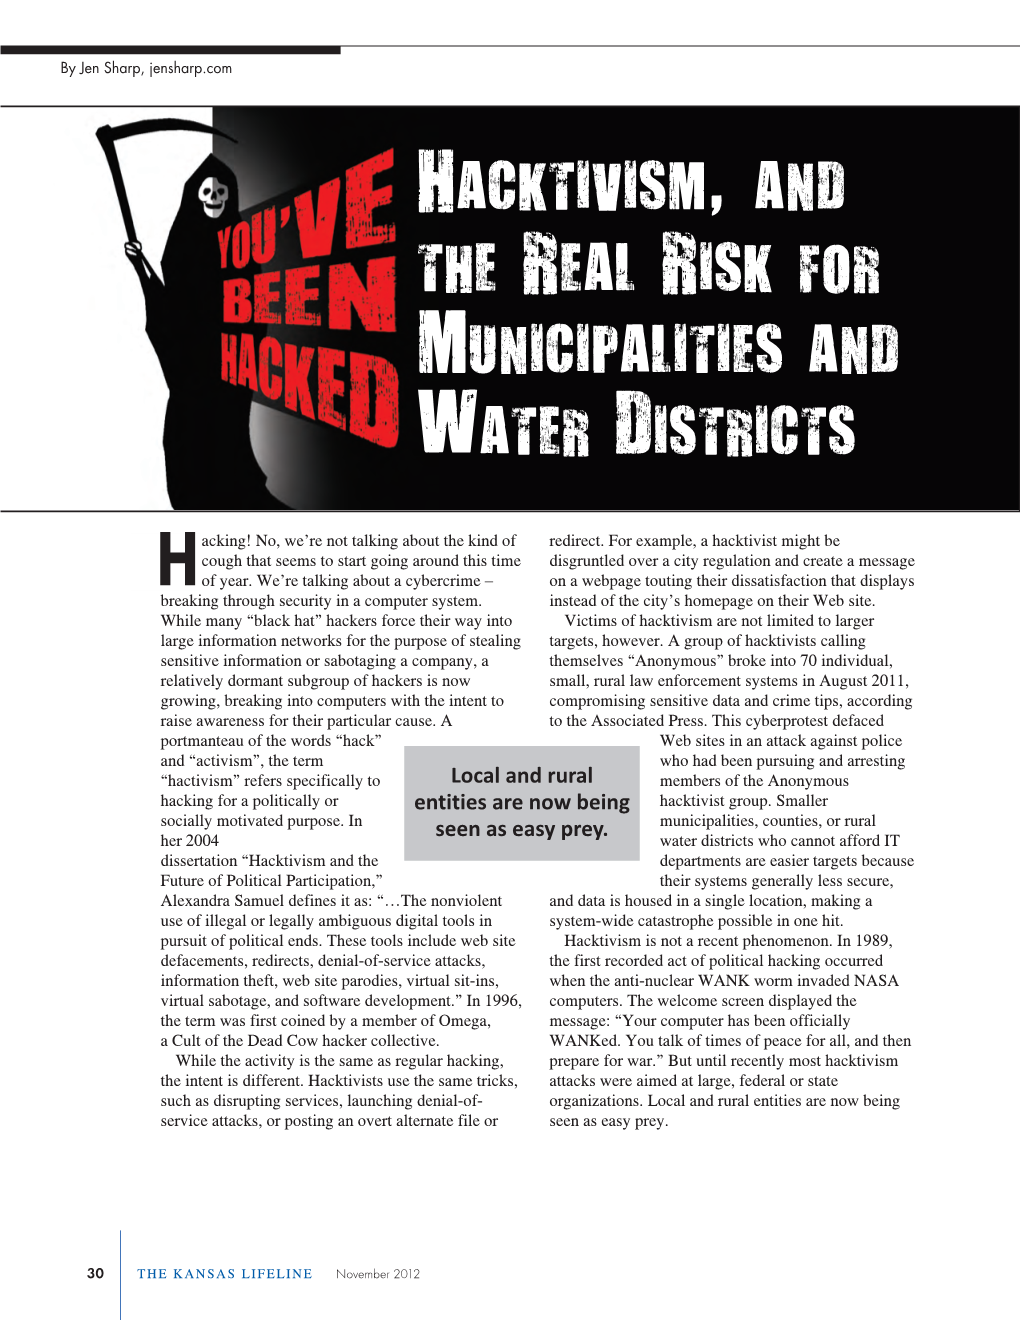 Hacktivism, and the Real Risk for Municipalities and Water Districts